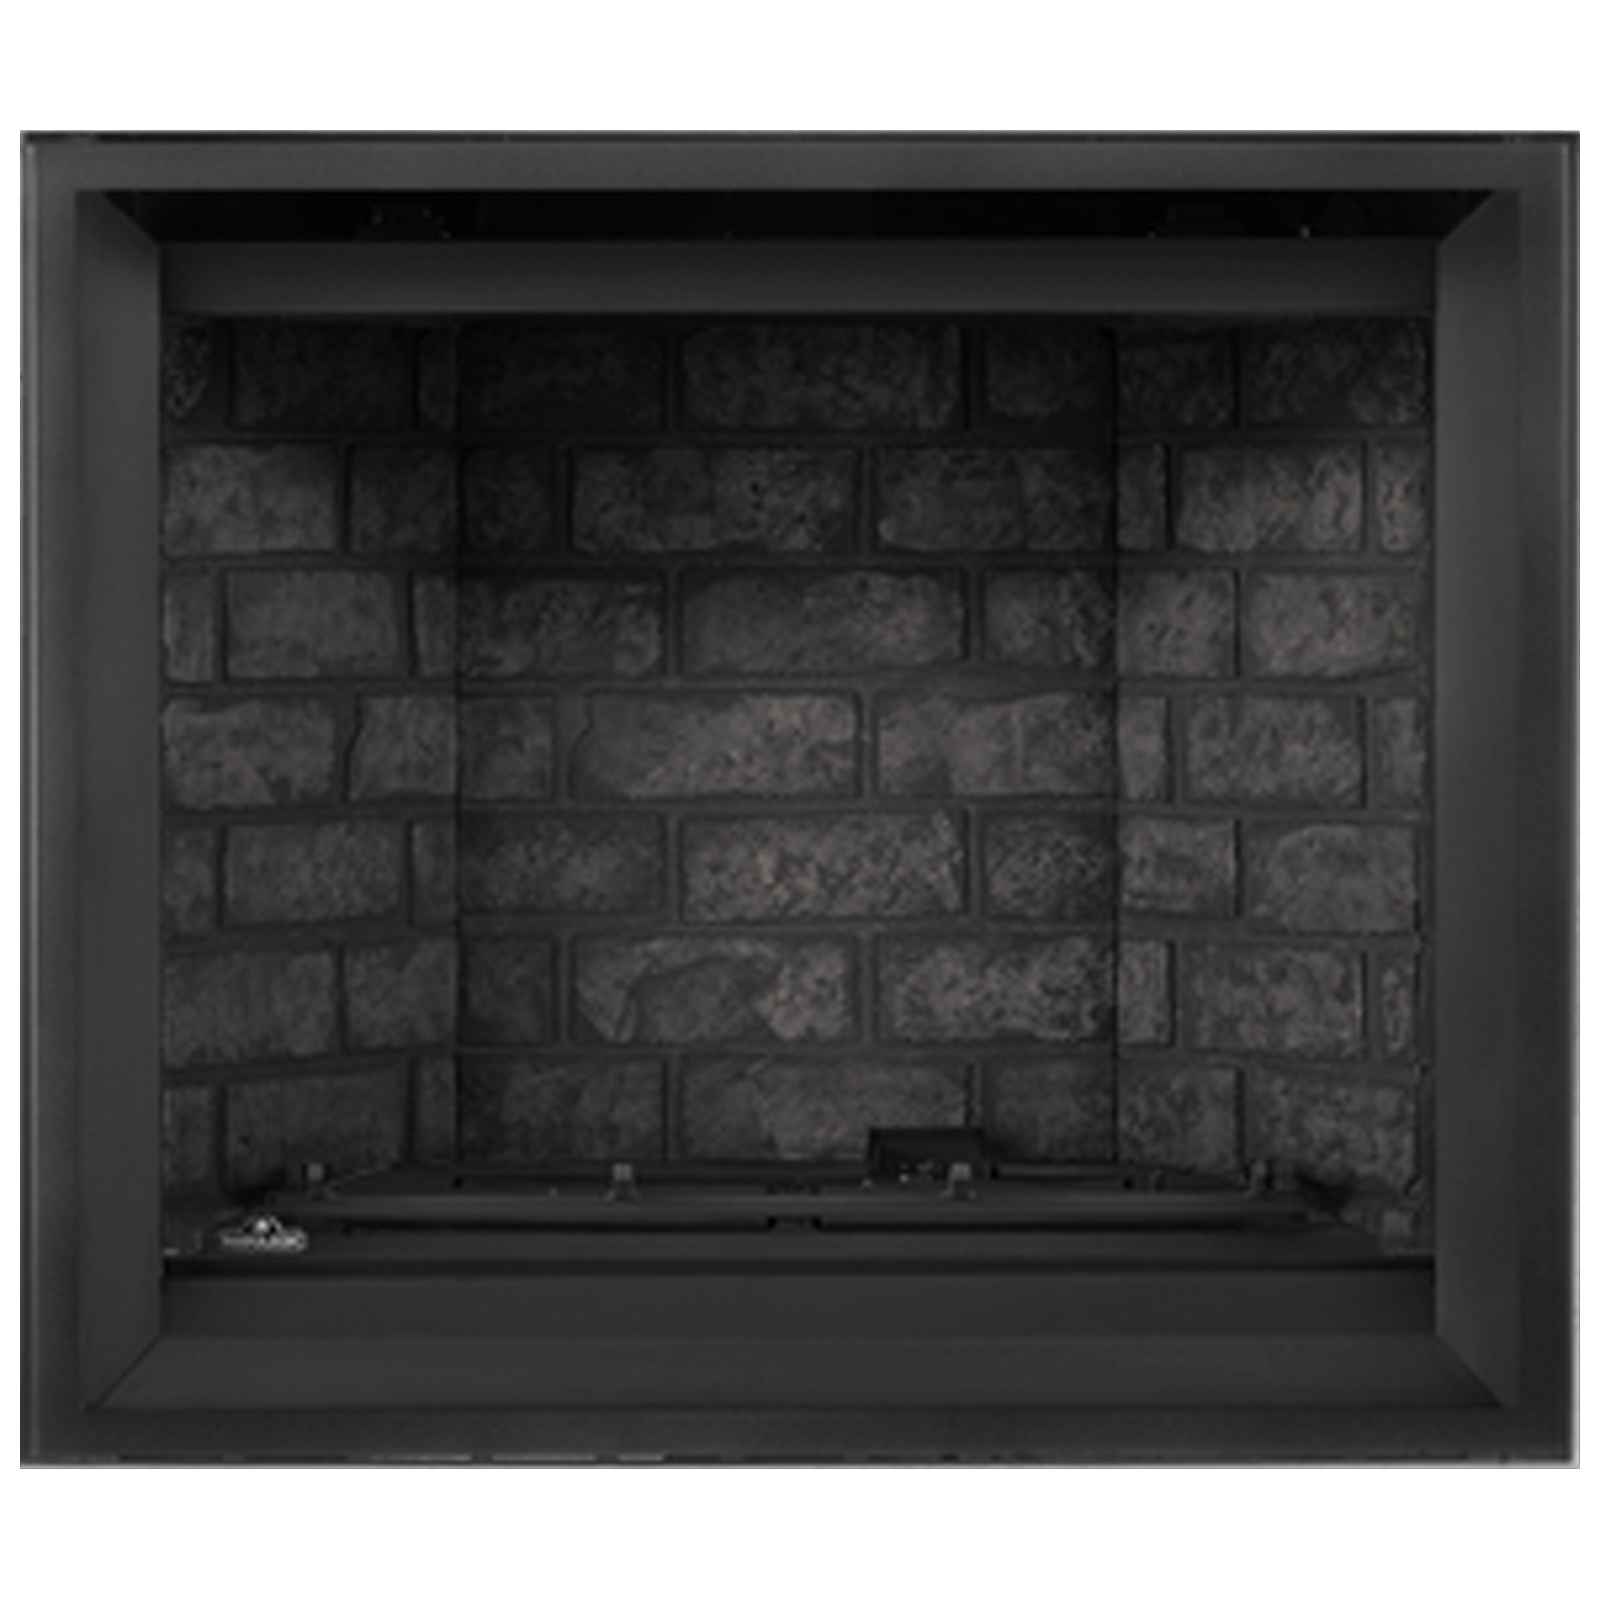 Napoleon Altitude X 42 Direct Vent Gas Fireplace - AX42